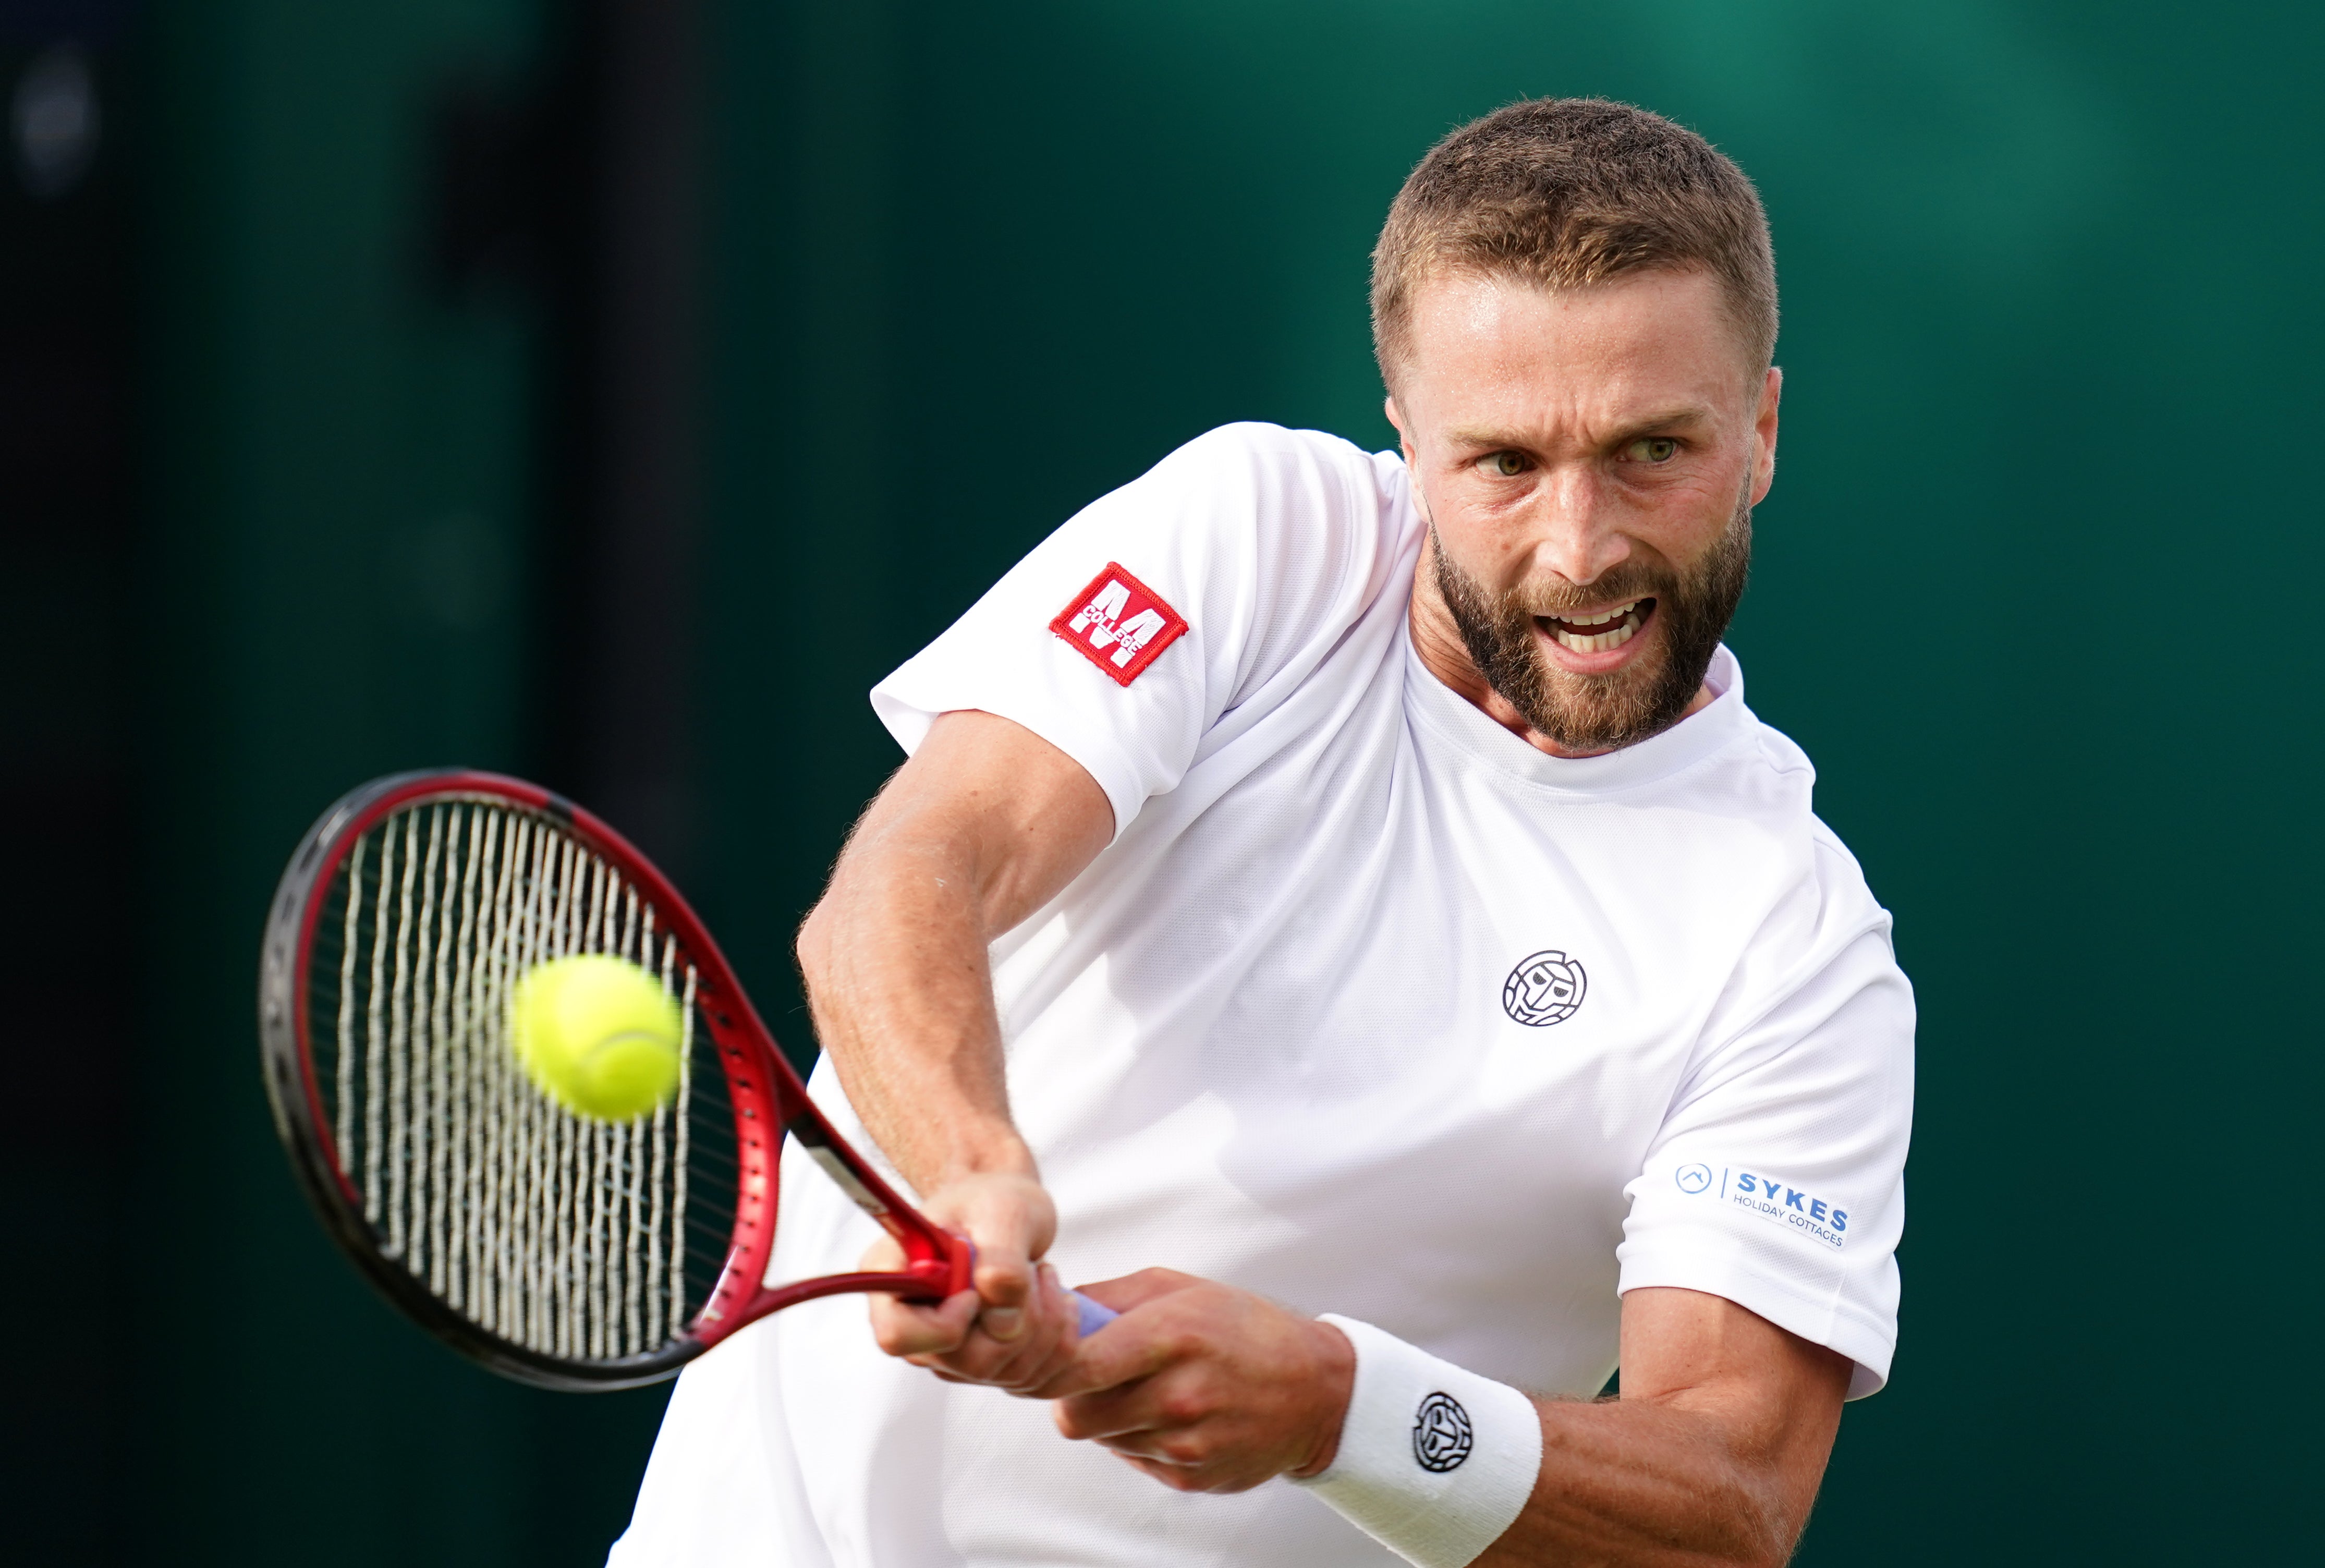 Liam Broady, Paul Jubb and Yuriko Miyazaki progress in French Open qualifying The Independent